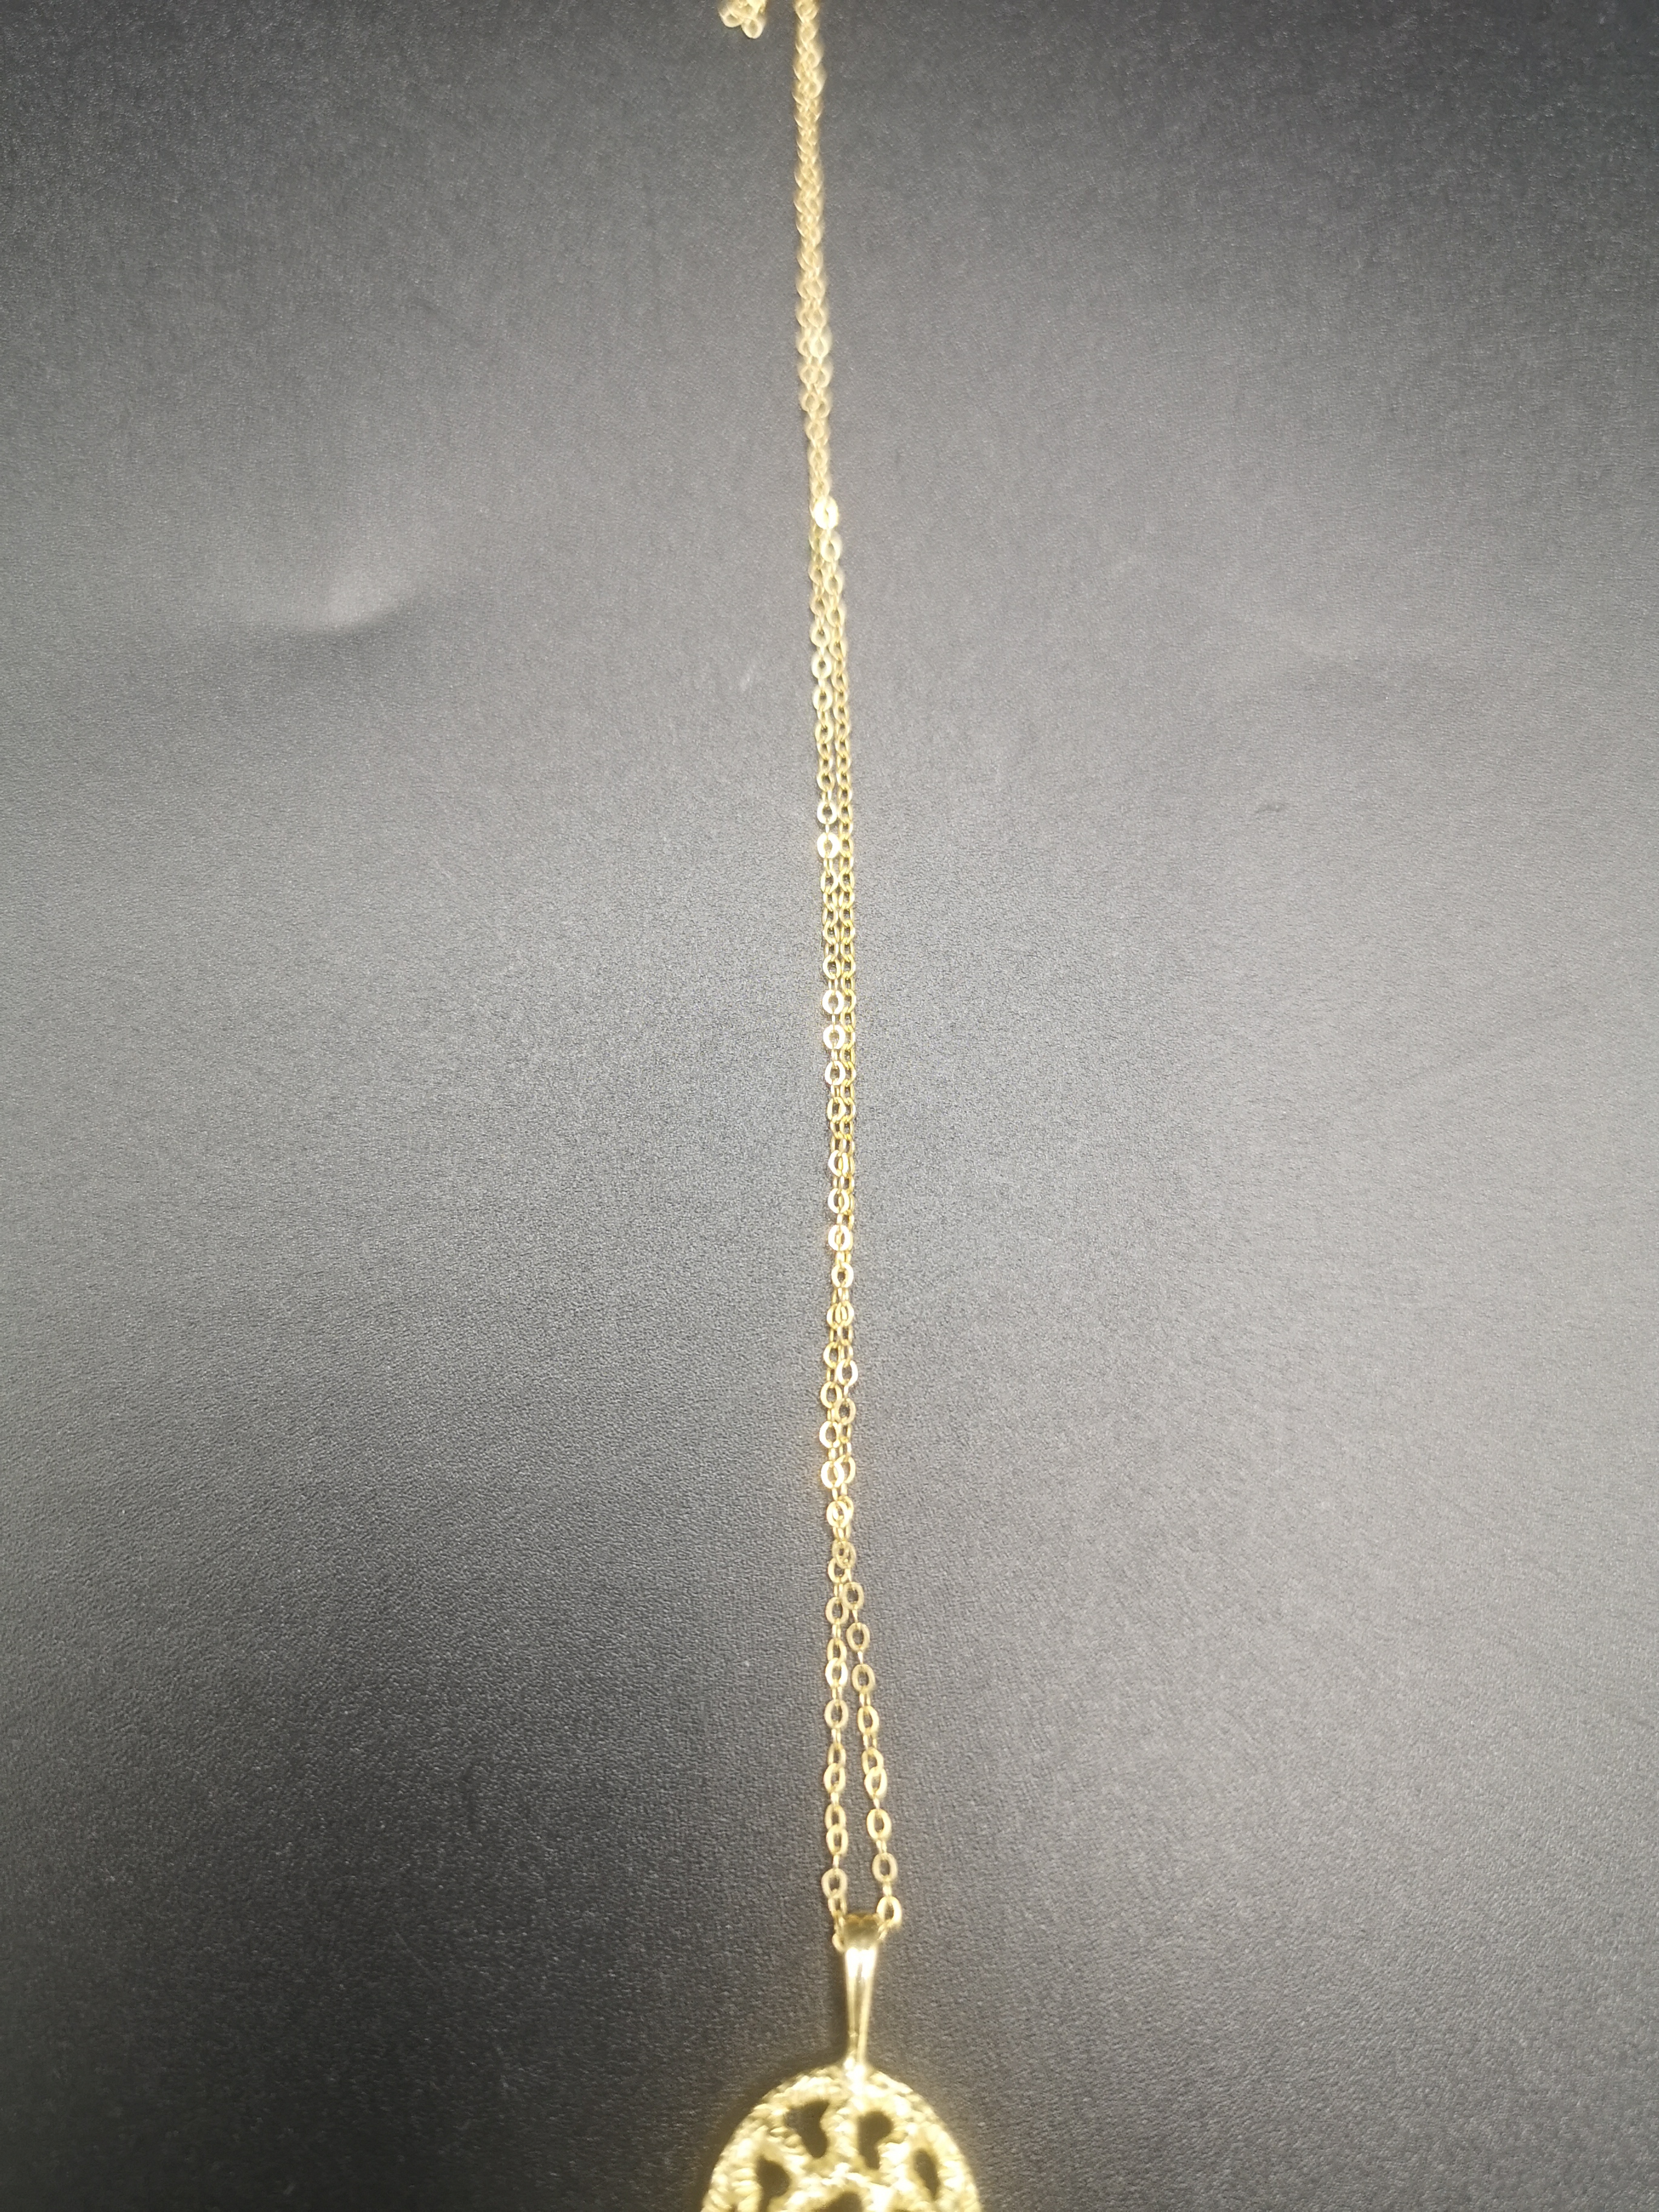 9ct gold necklace and pendant - Image 4 of 6